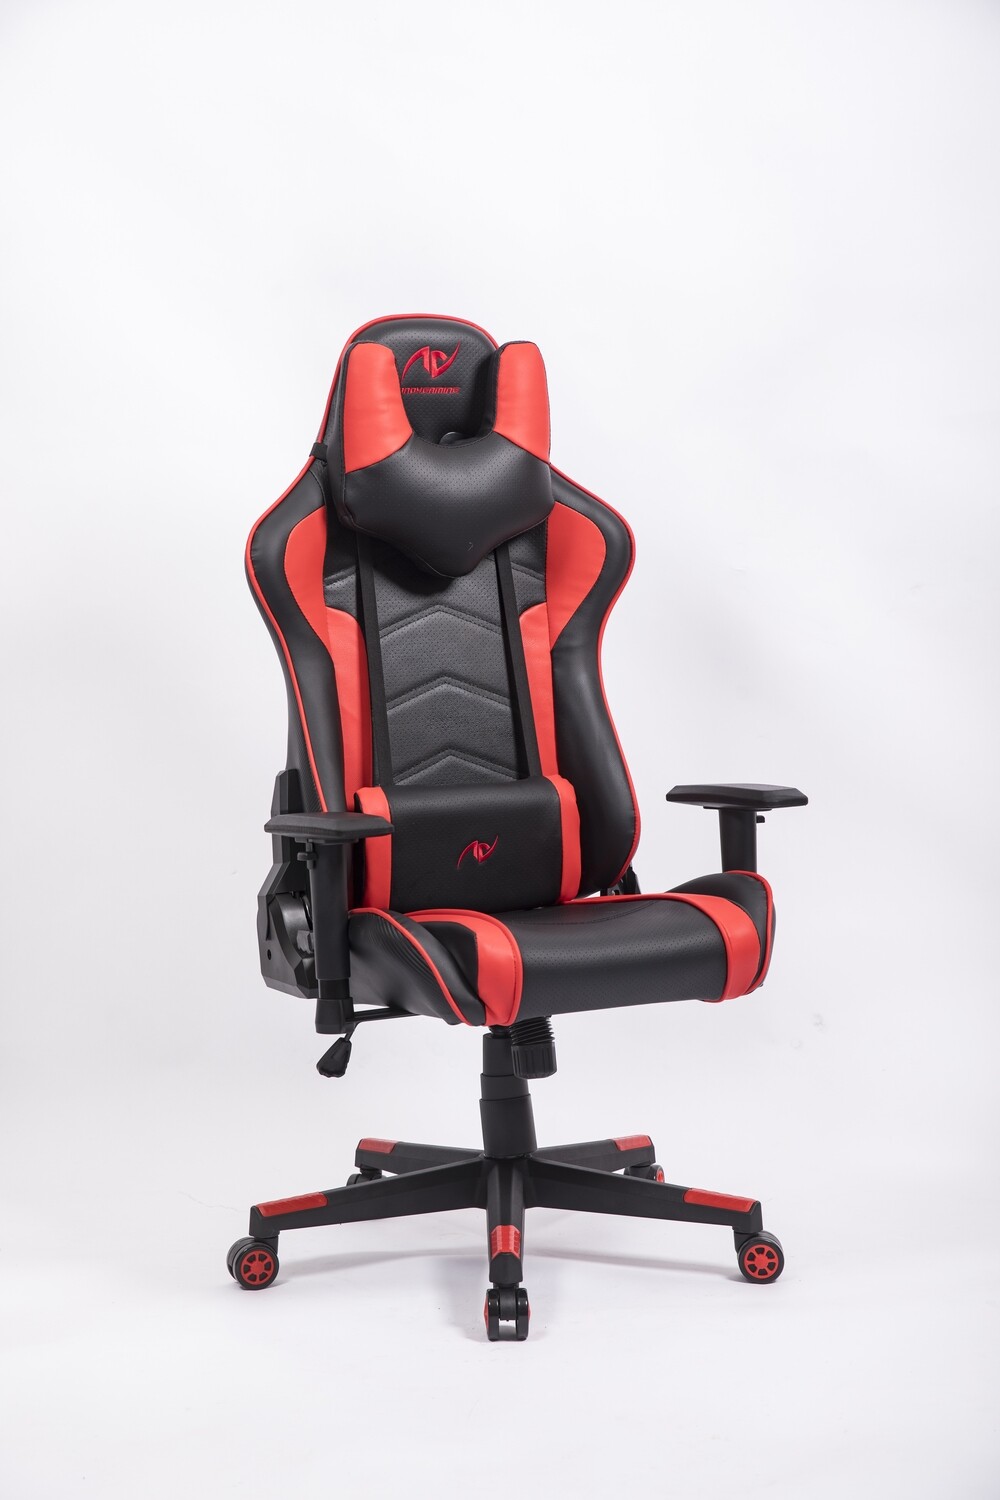 AndyGaming Red Gaming Chair